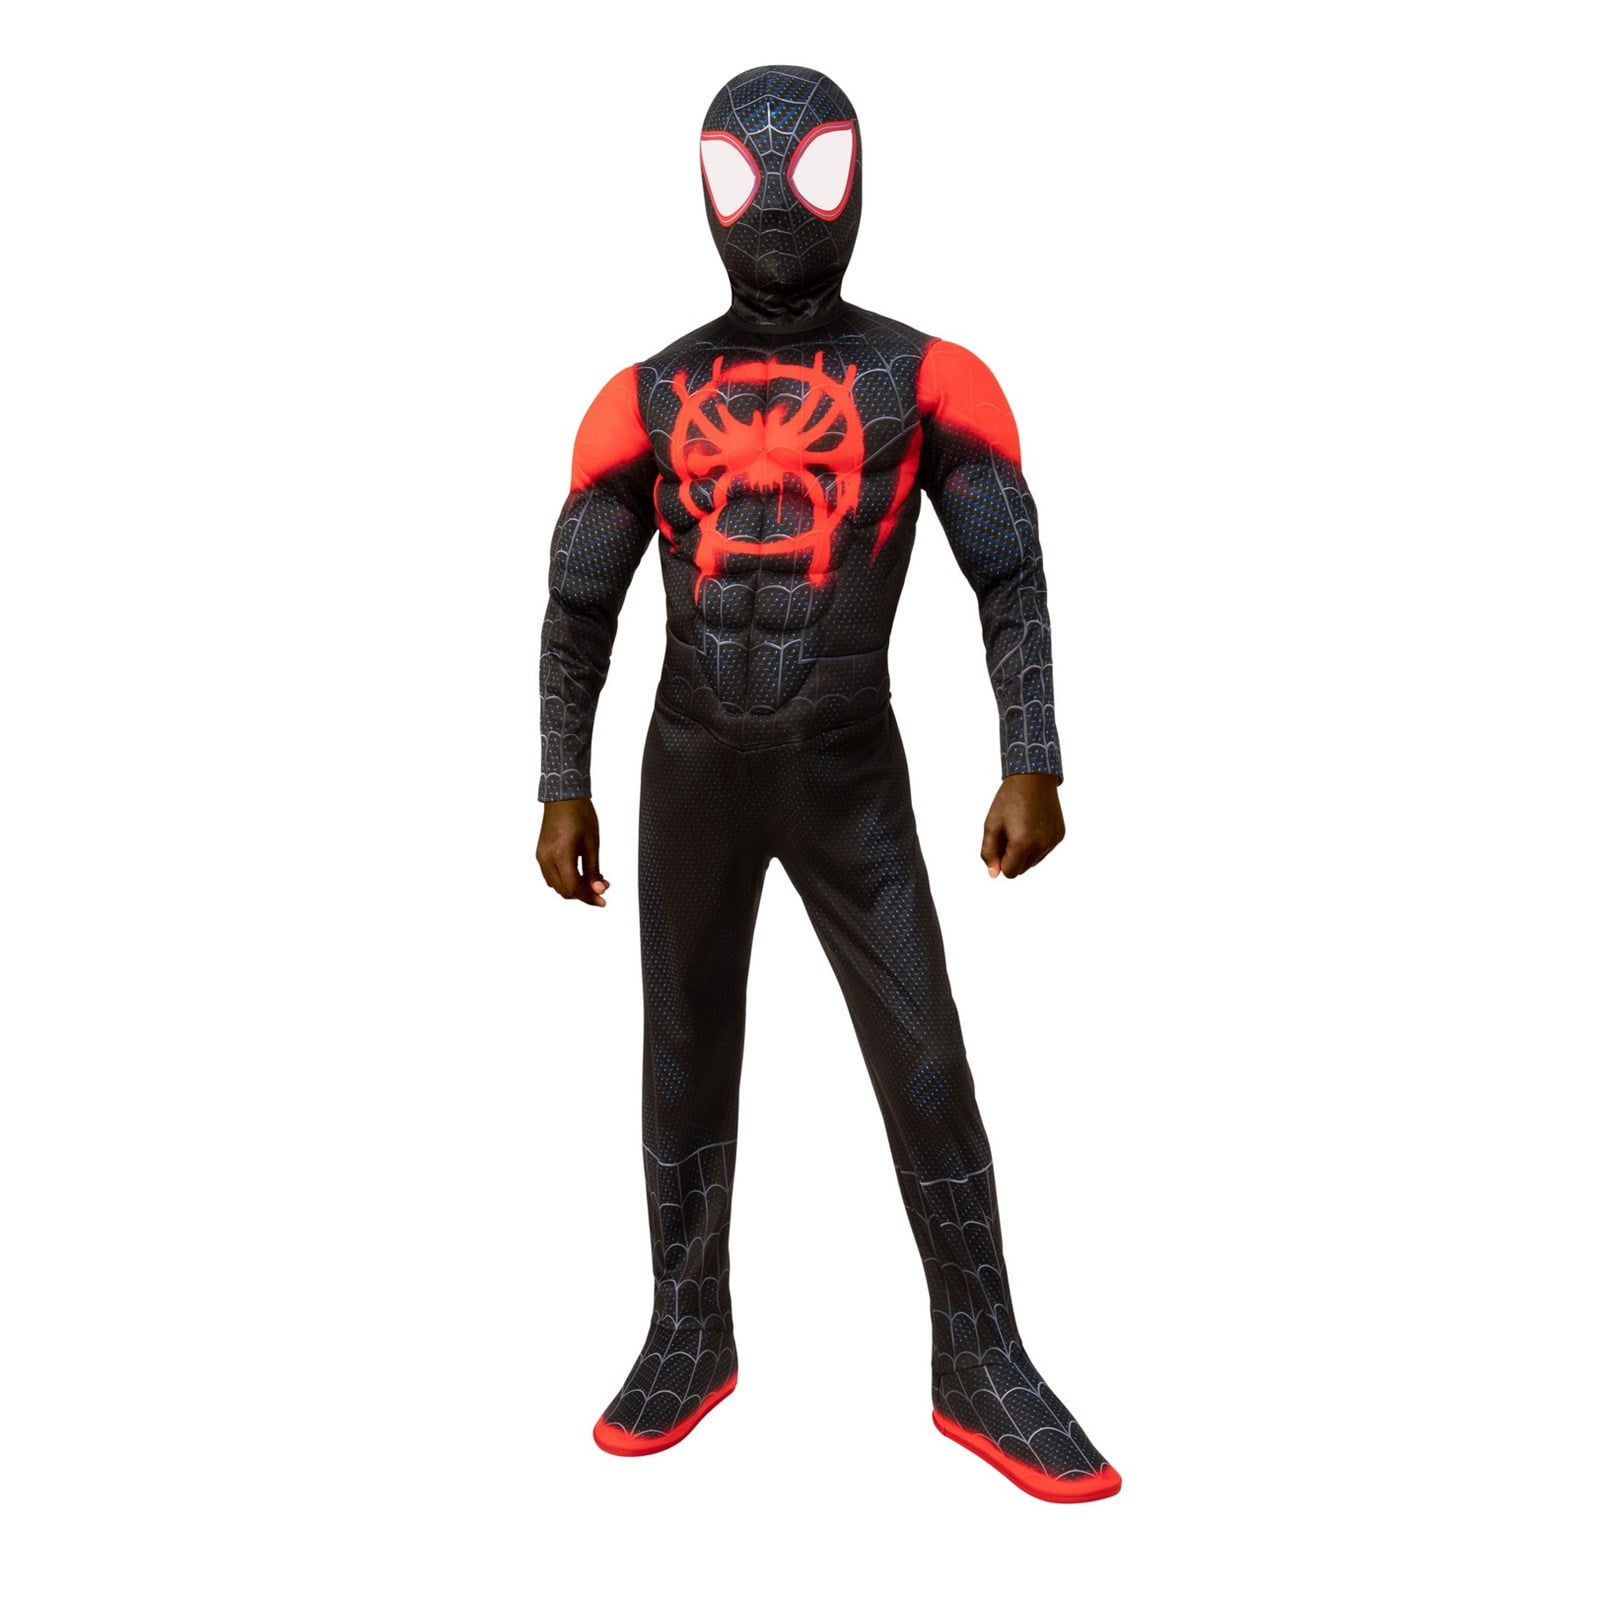 YME Superhero Spider-Man:Miles Morales Costume for Kids,Spiderman:Far from Home Cosplay Costumes for Boys 